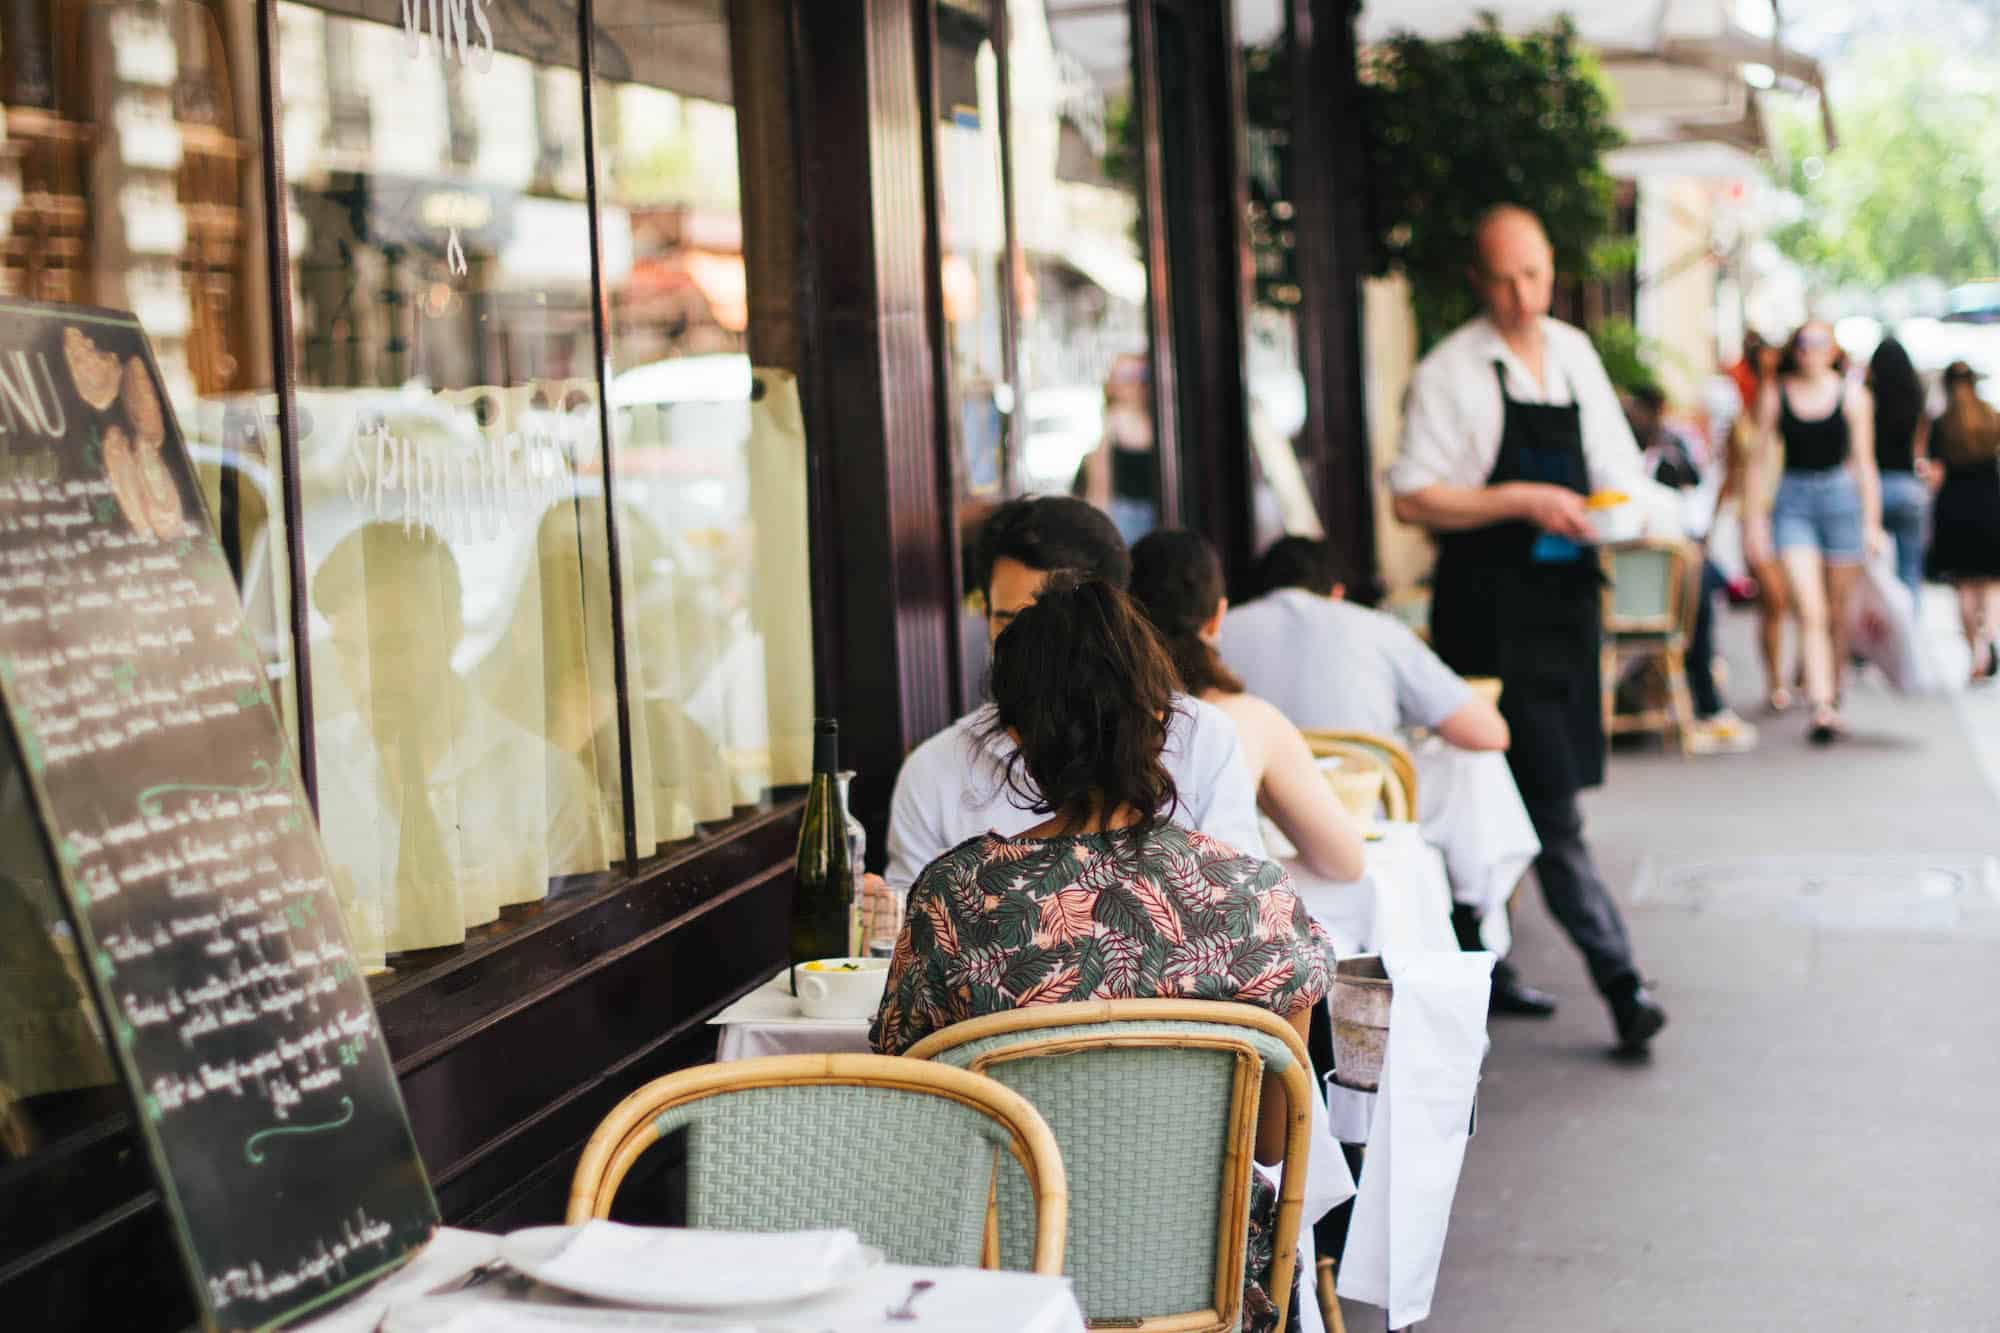 A couple sitting on the terrace of the Paris restaurant Bistrot Paul Bert. There is a chalk board menu and a waiter in a black apron coming out to serve them, with people walking down the street in the background.